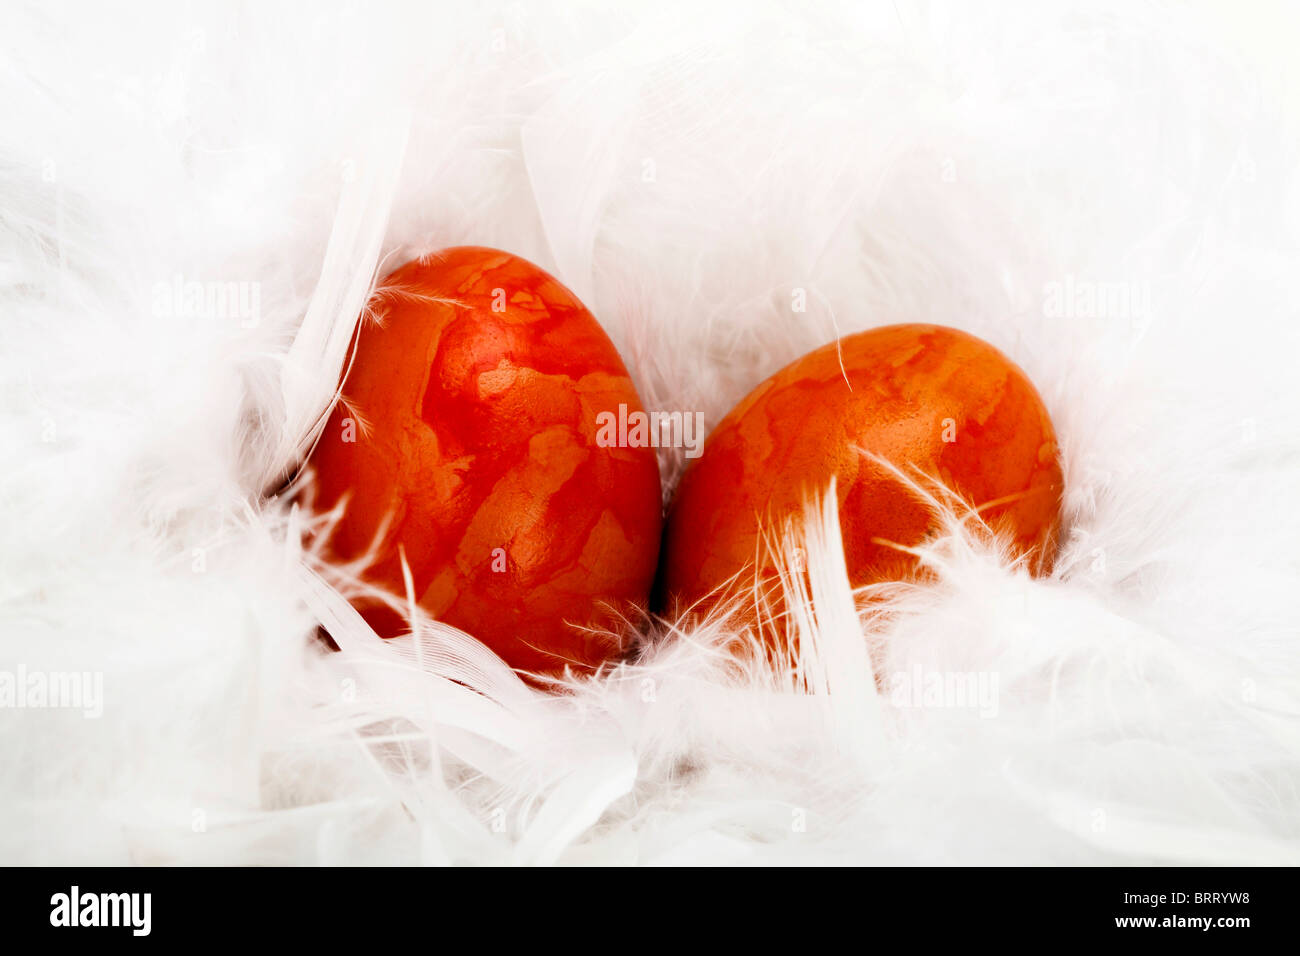 Easter eggs on white feathers Stock Photo